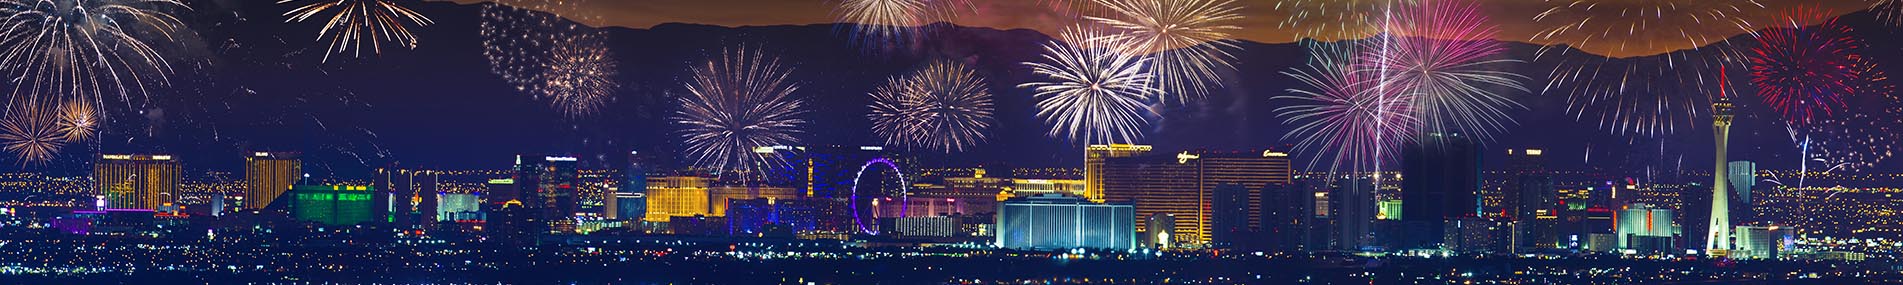 New Year's Eve 2017 Events in Las Vegas - Las Vegas Monorail